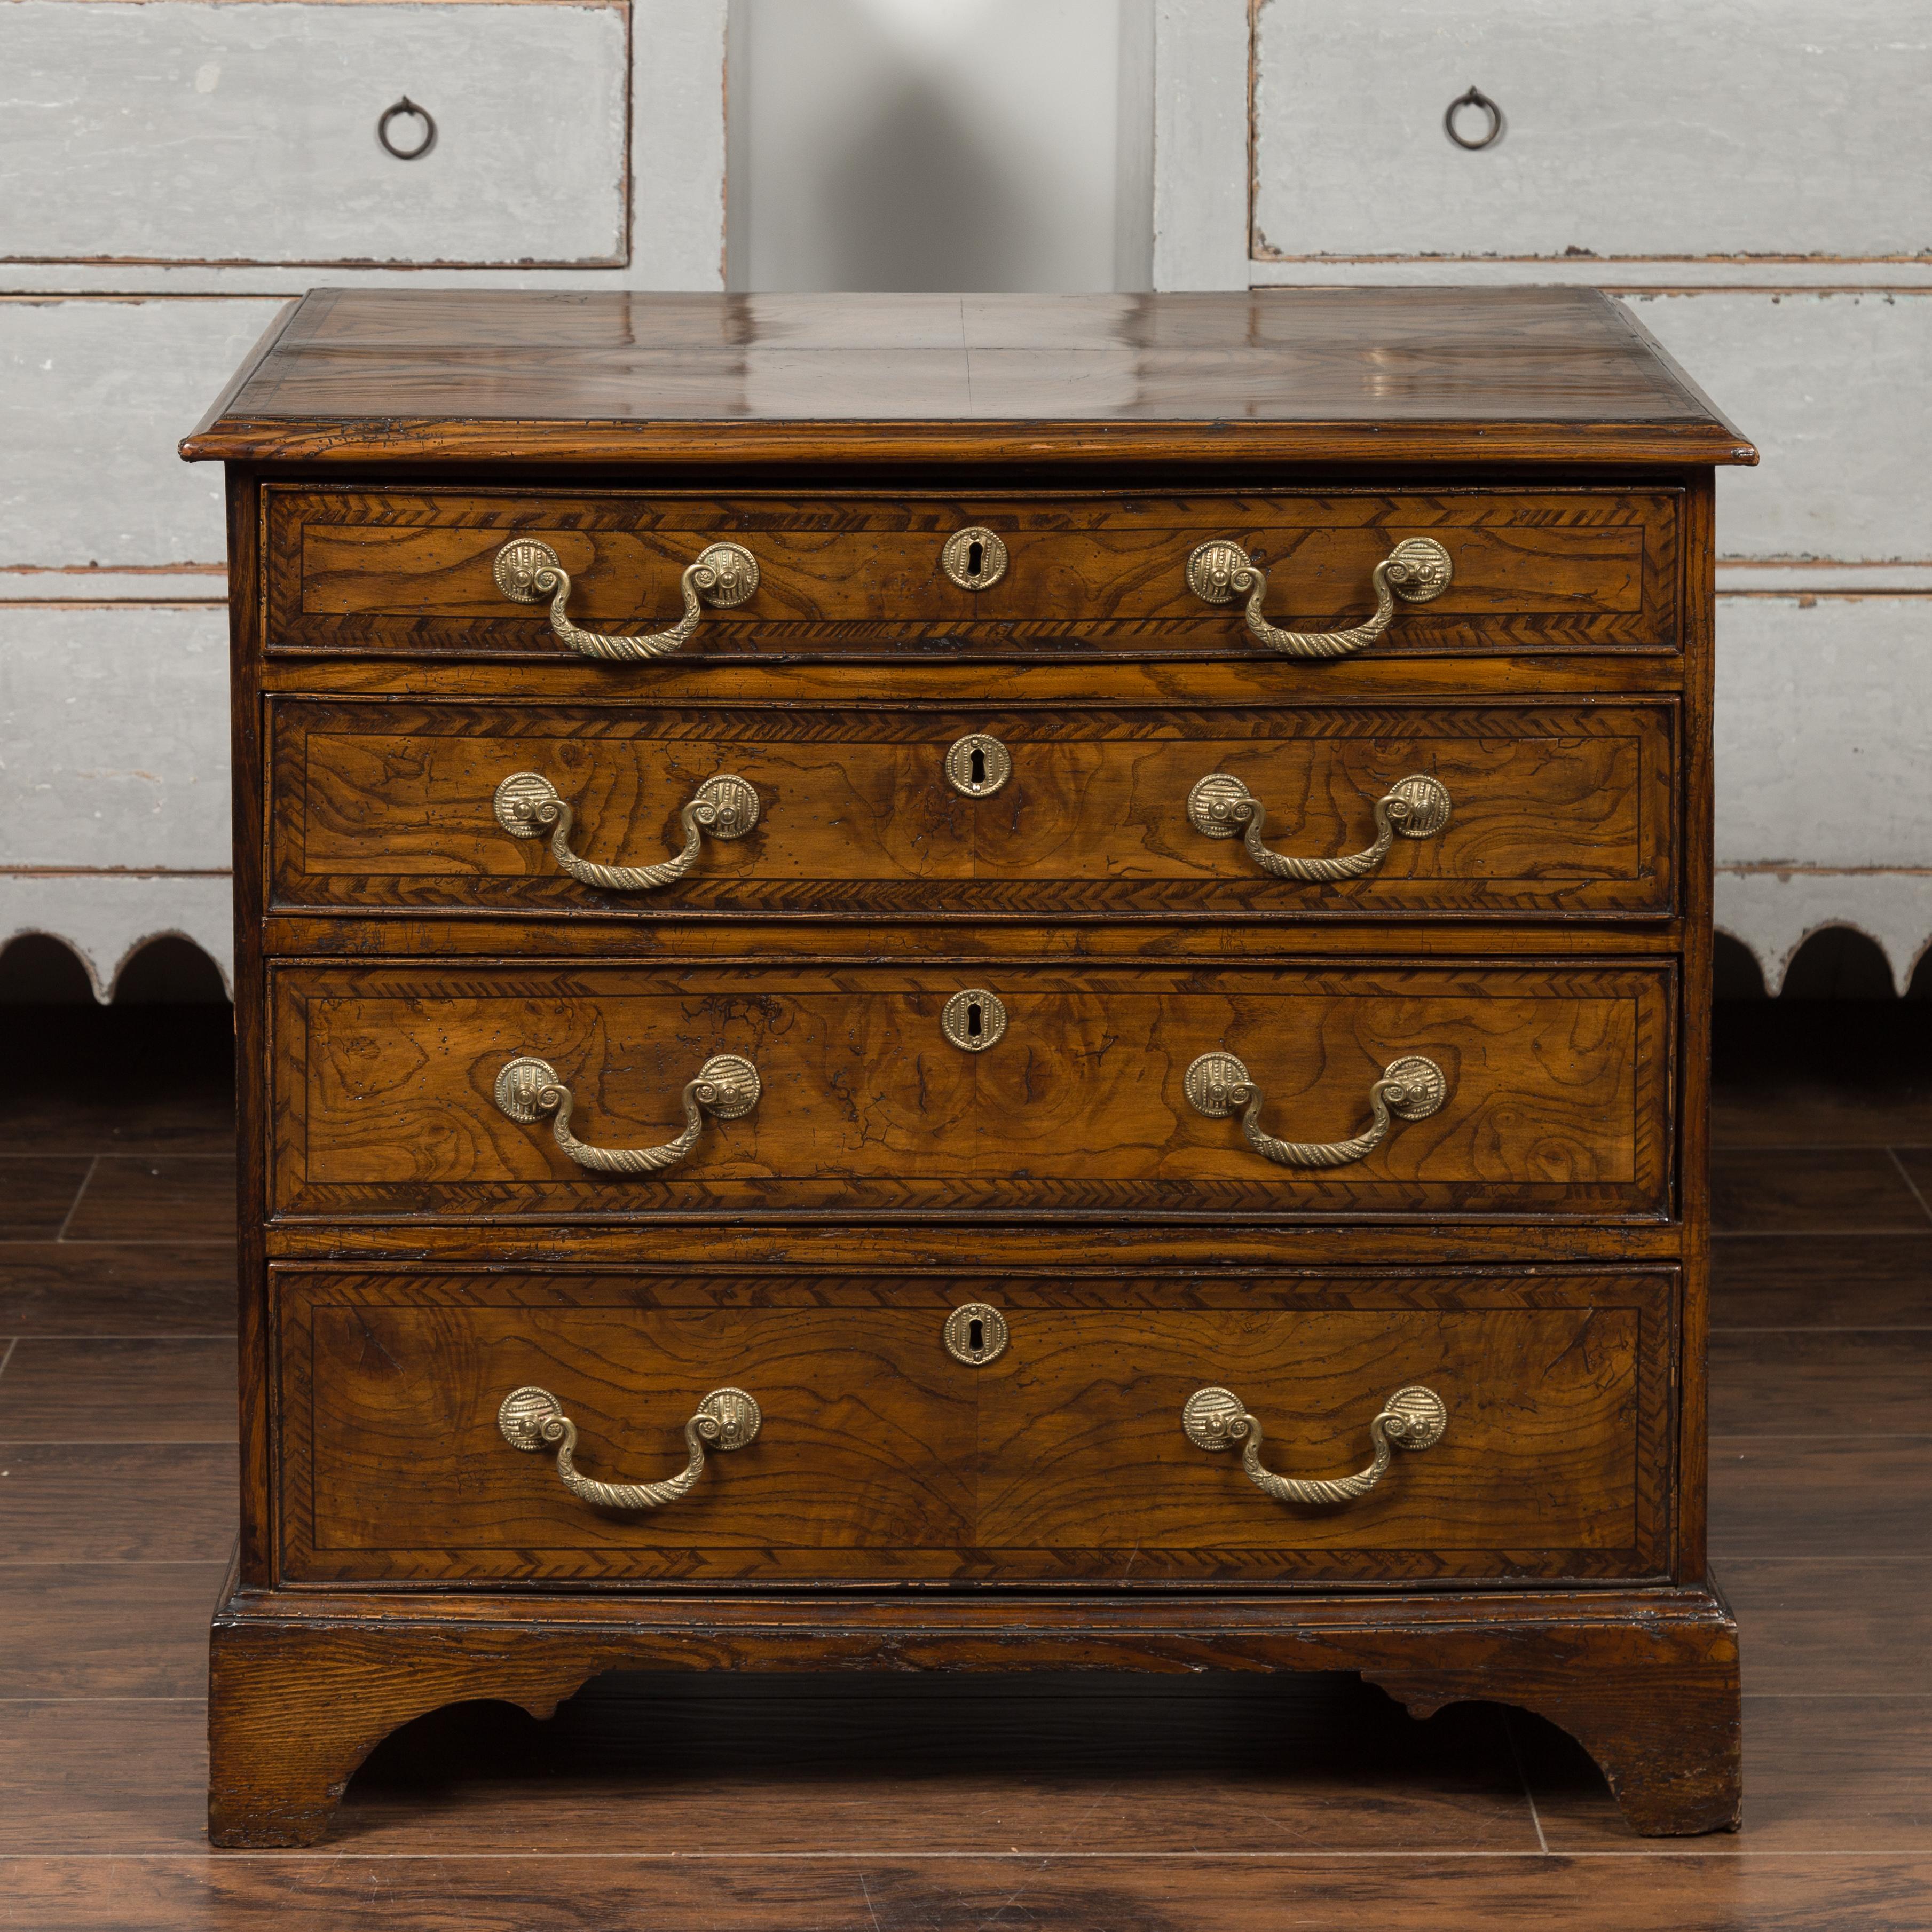 19th Century English 1800s George III Burl Wood Four-Drawer Commode with Feather Banding For Sale